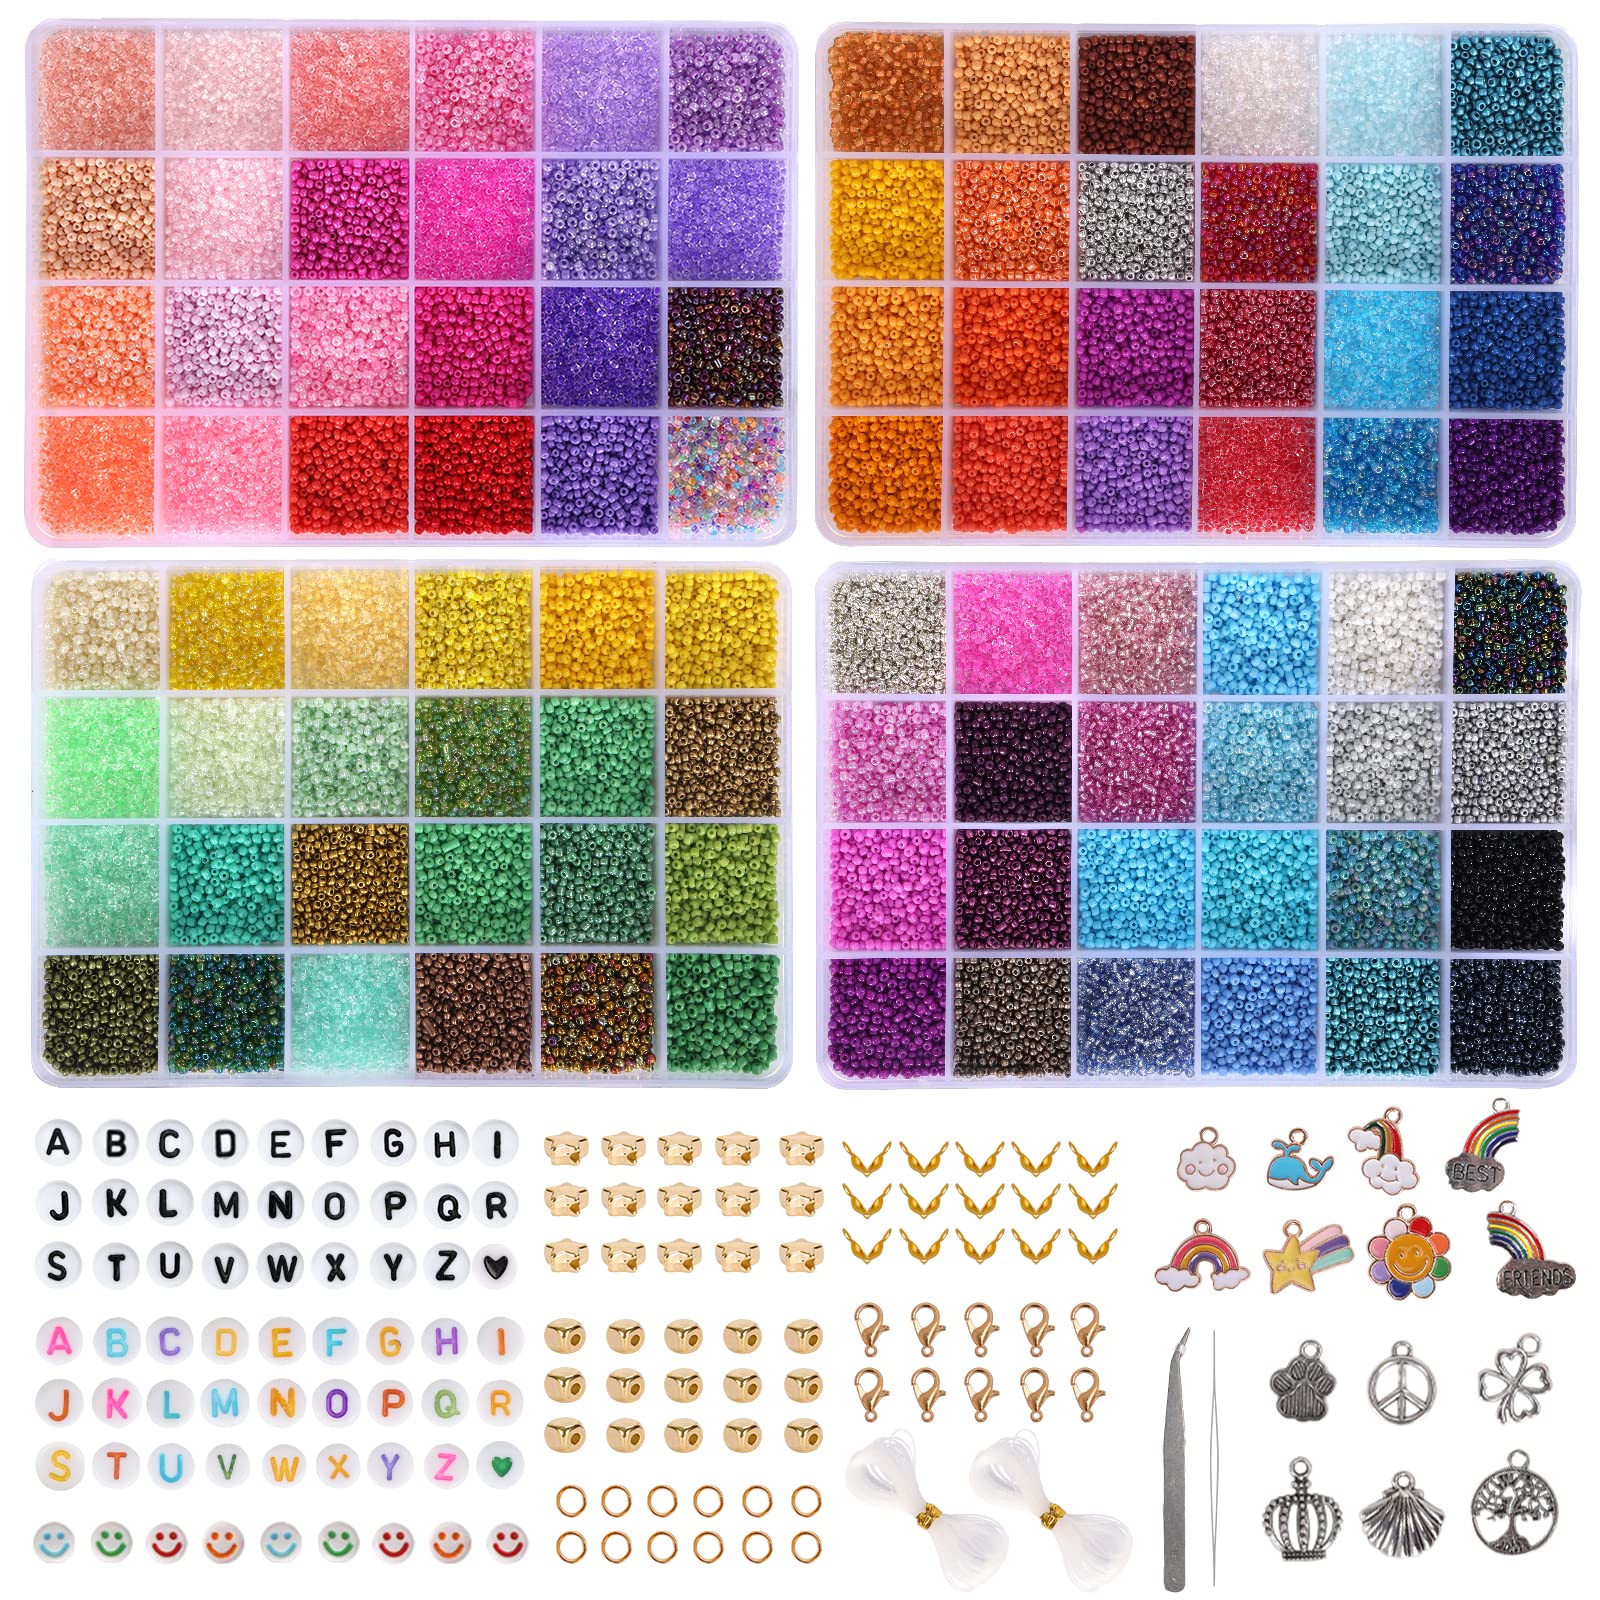 QUEFE 48000pcs 2mm Glass Seed Beads for Jewelry Making Kit 96 Colors Small Bracelet  Beads with Pendant Charms Kit and Letter Beads for Bracelets Necklace Ring  Making DIY Art and Craft